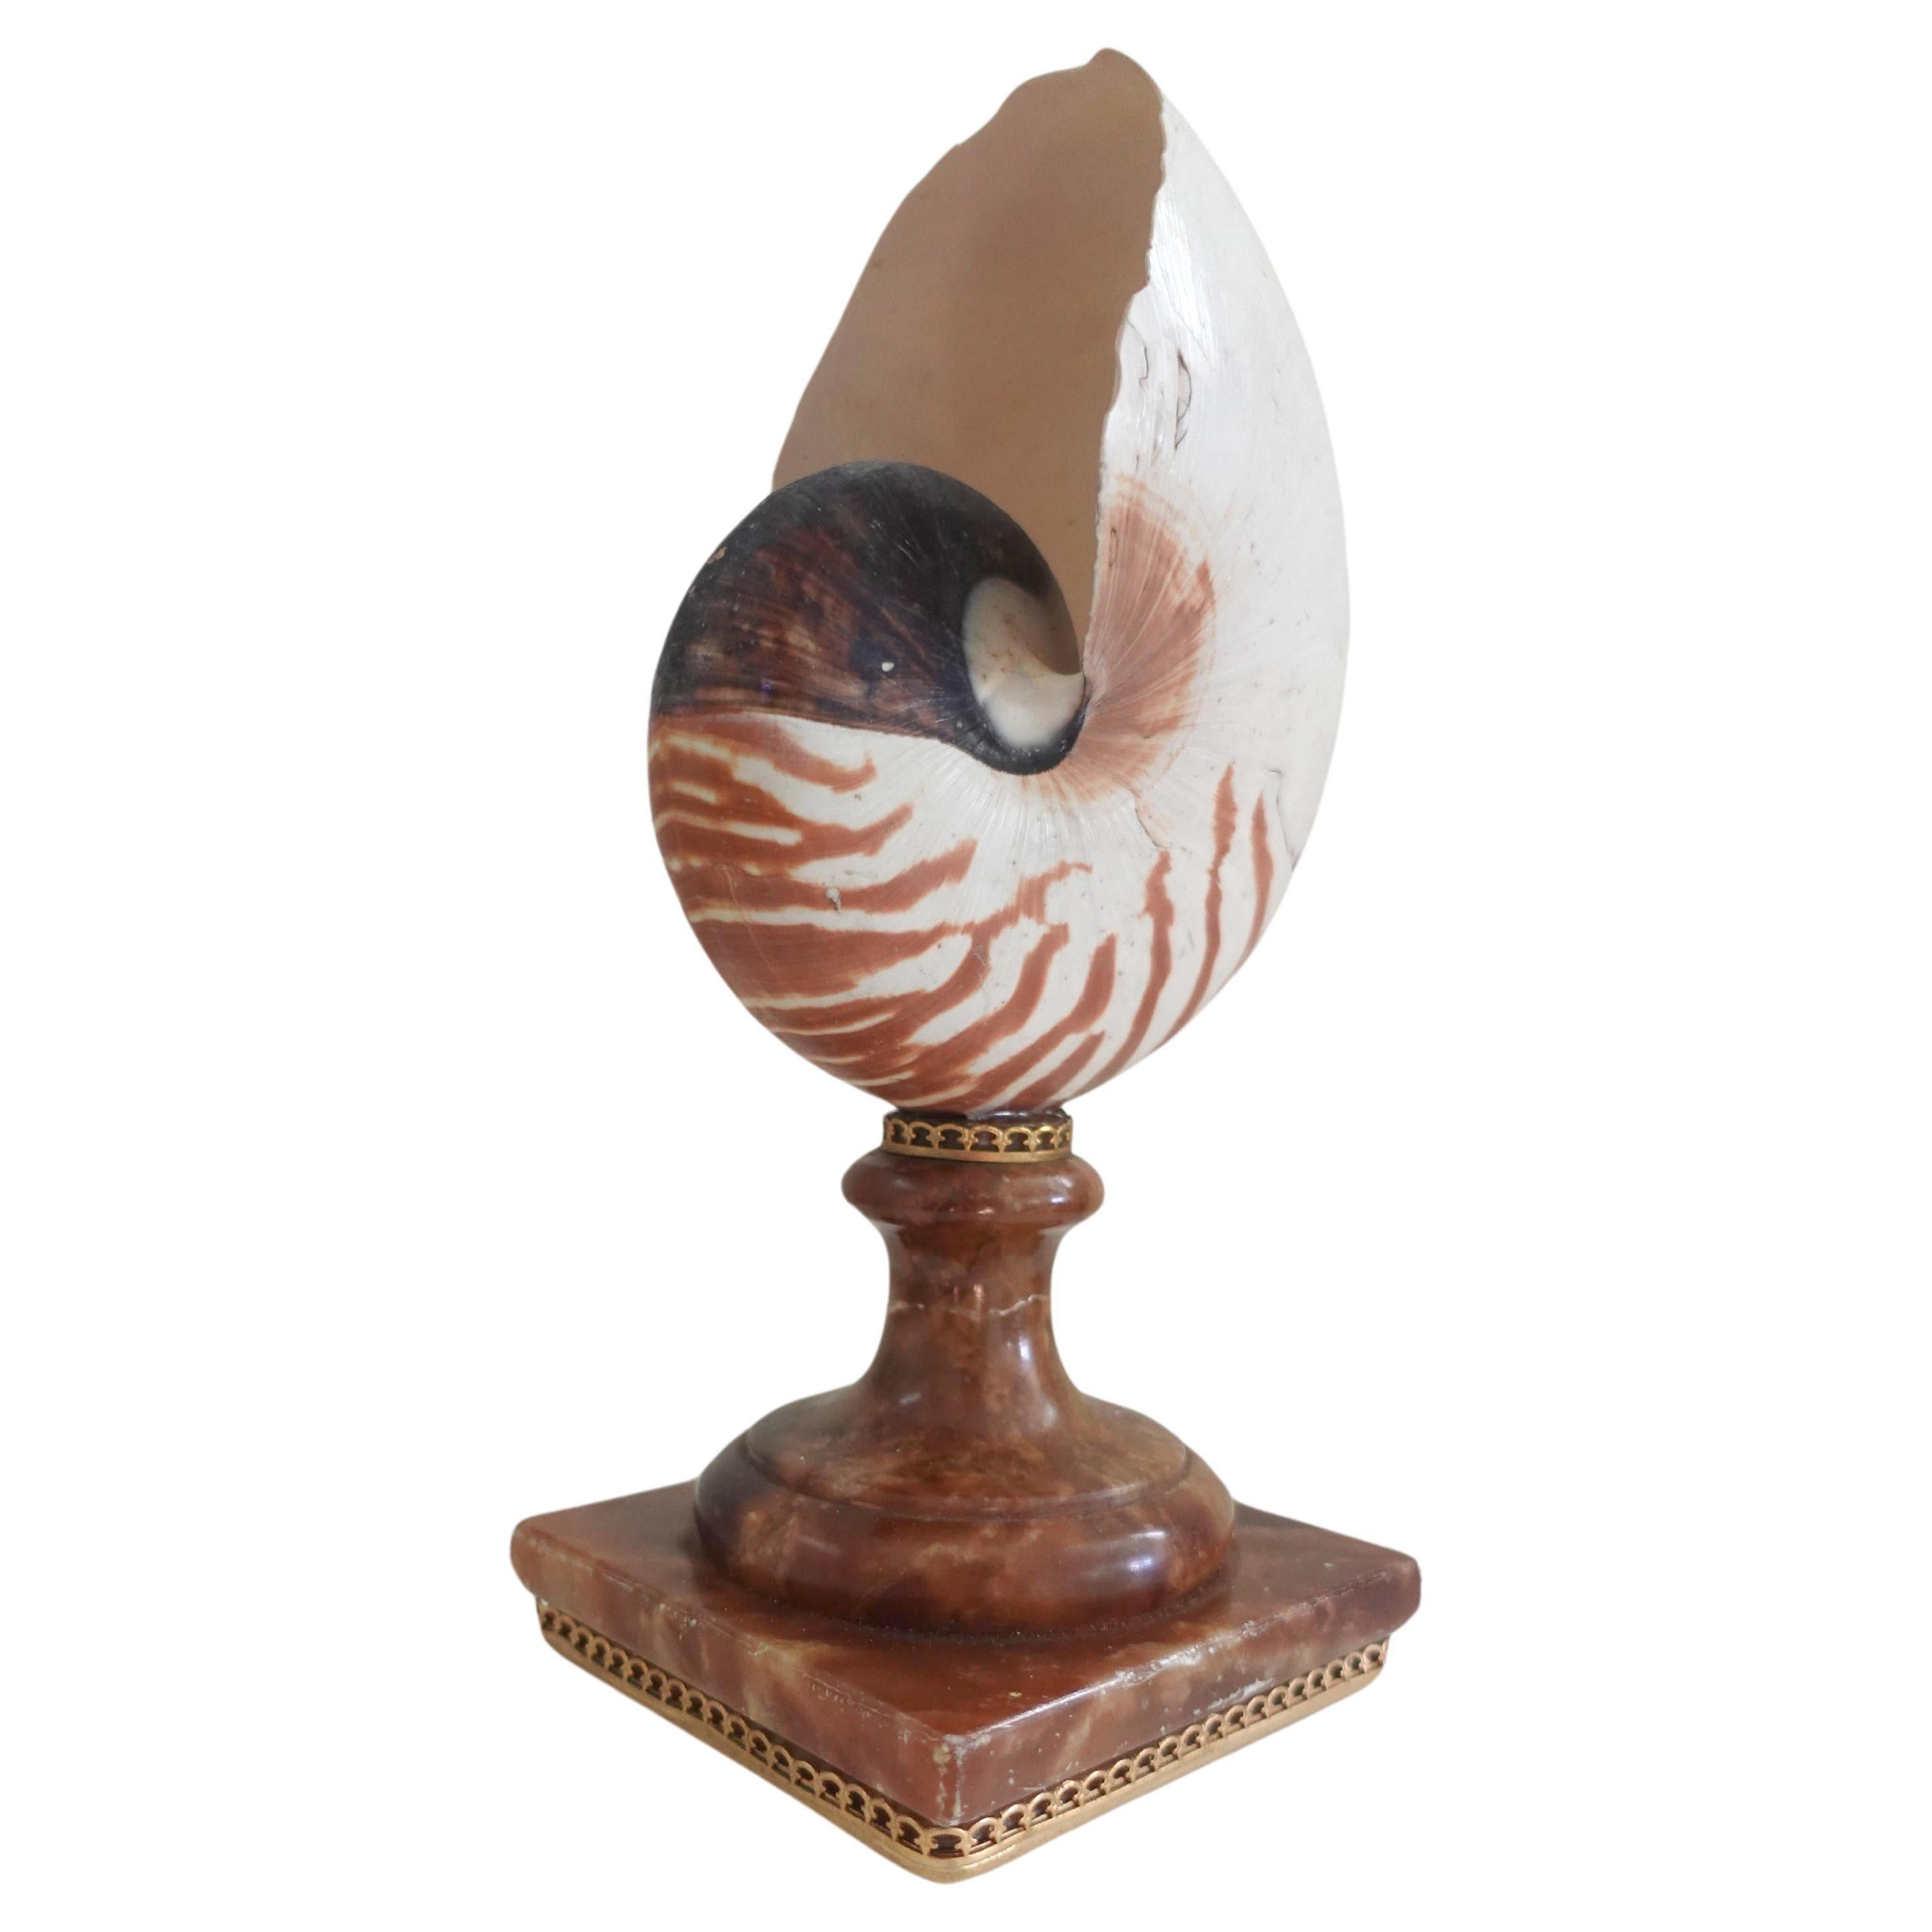 A Natural Striped Fully Chambered Nautilus Shell mounted to a vintage Sicilian Alabaster Base

Nautilus Pompulus on an alabaster stand
The shell: Philippines; harvested in the 20th century
The base: Sicily, Italy; second-half of the 20th